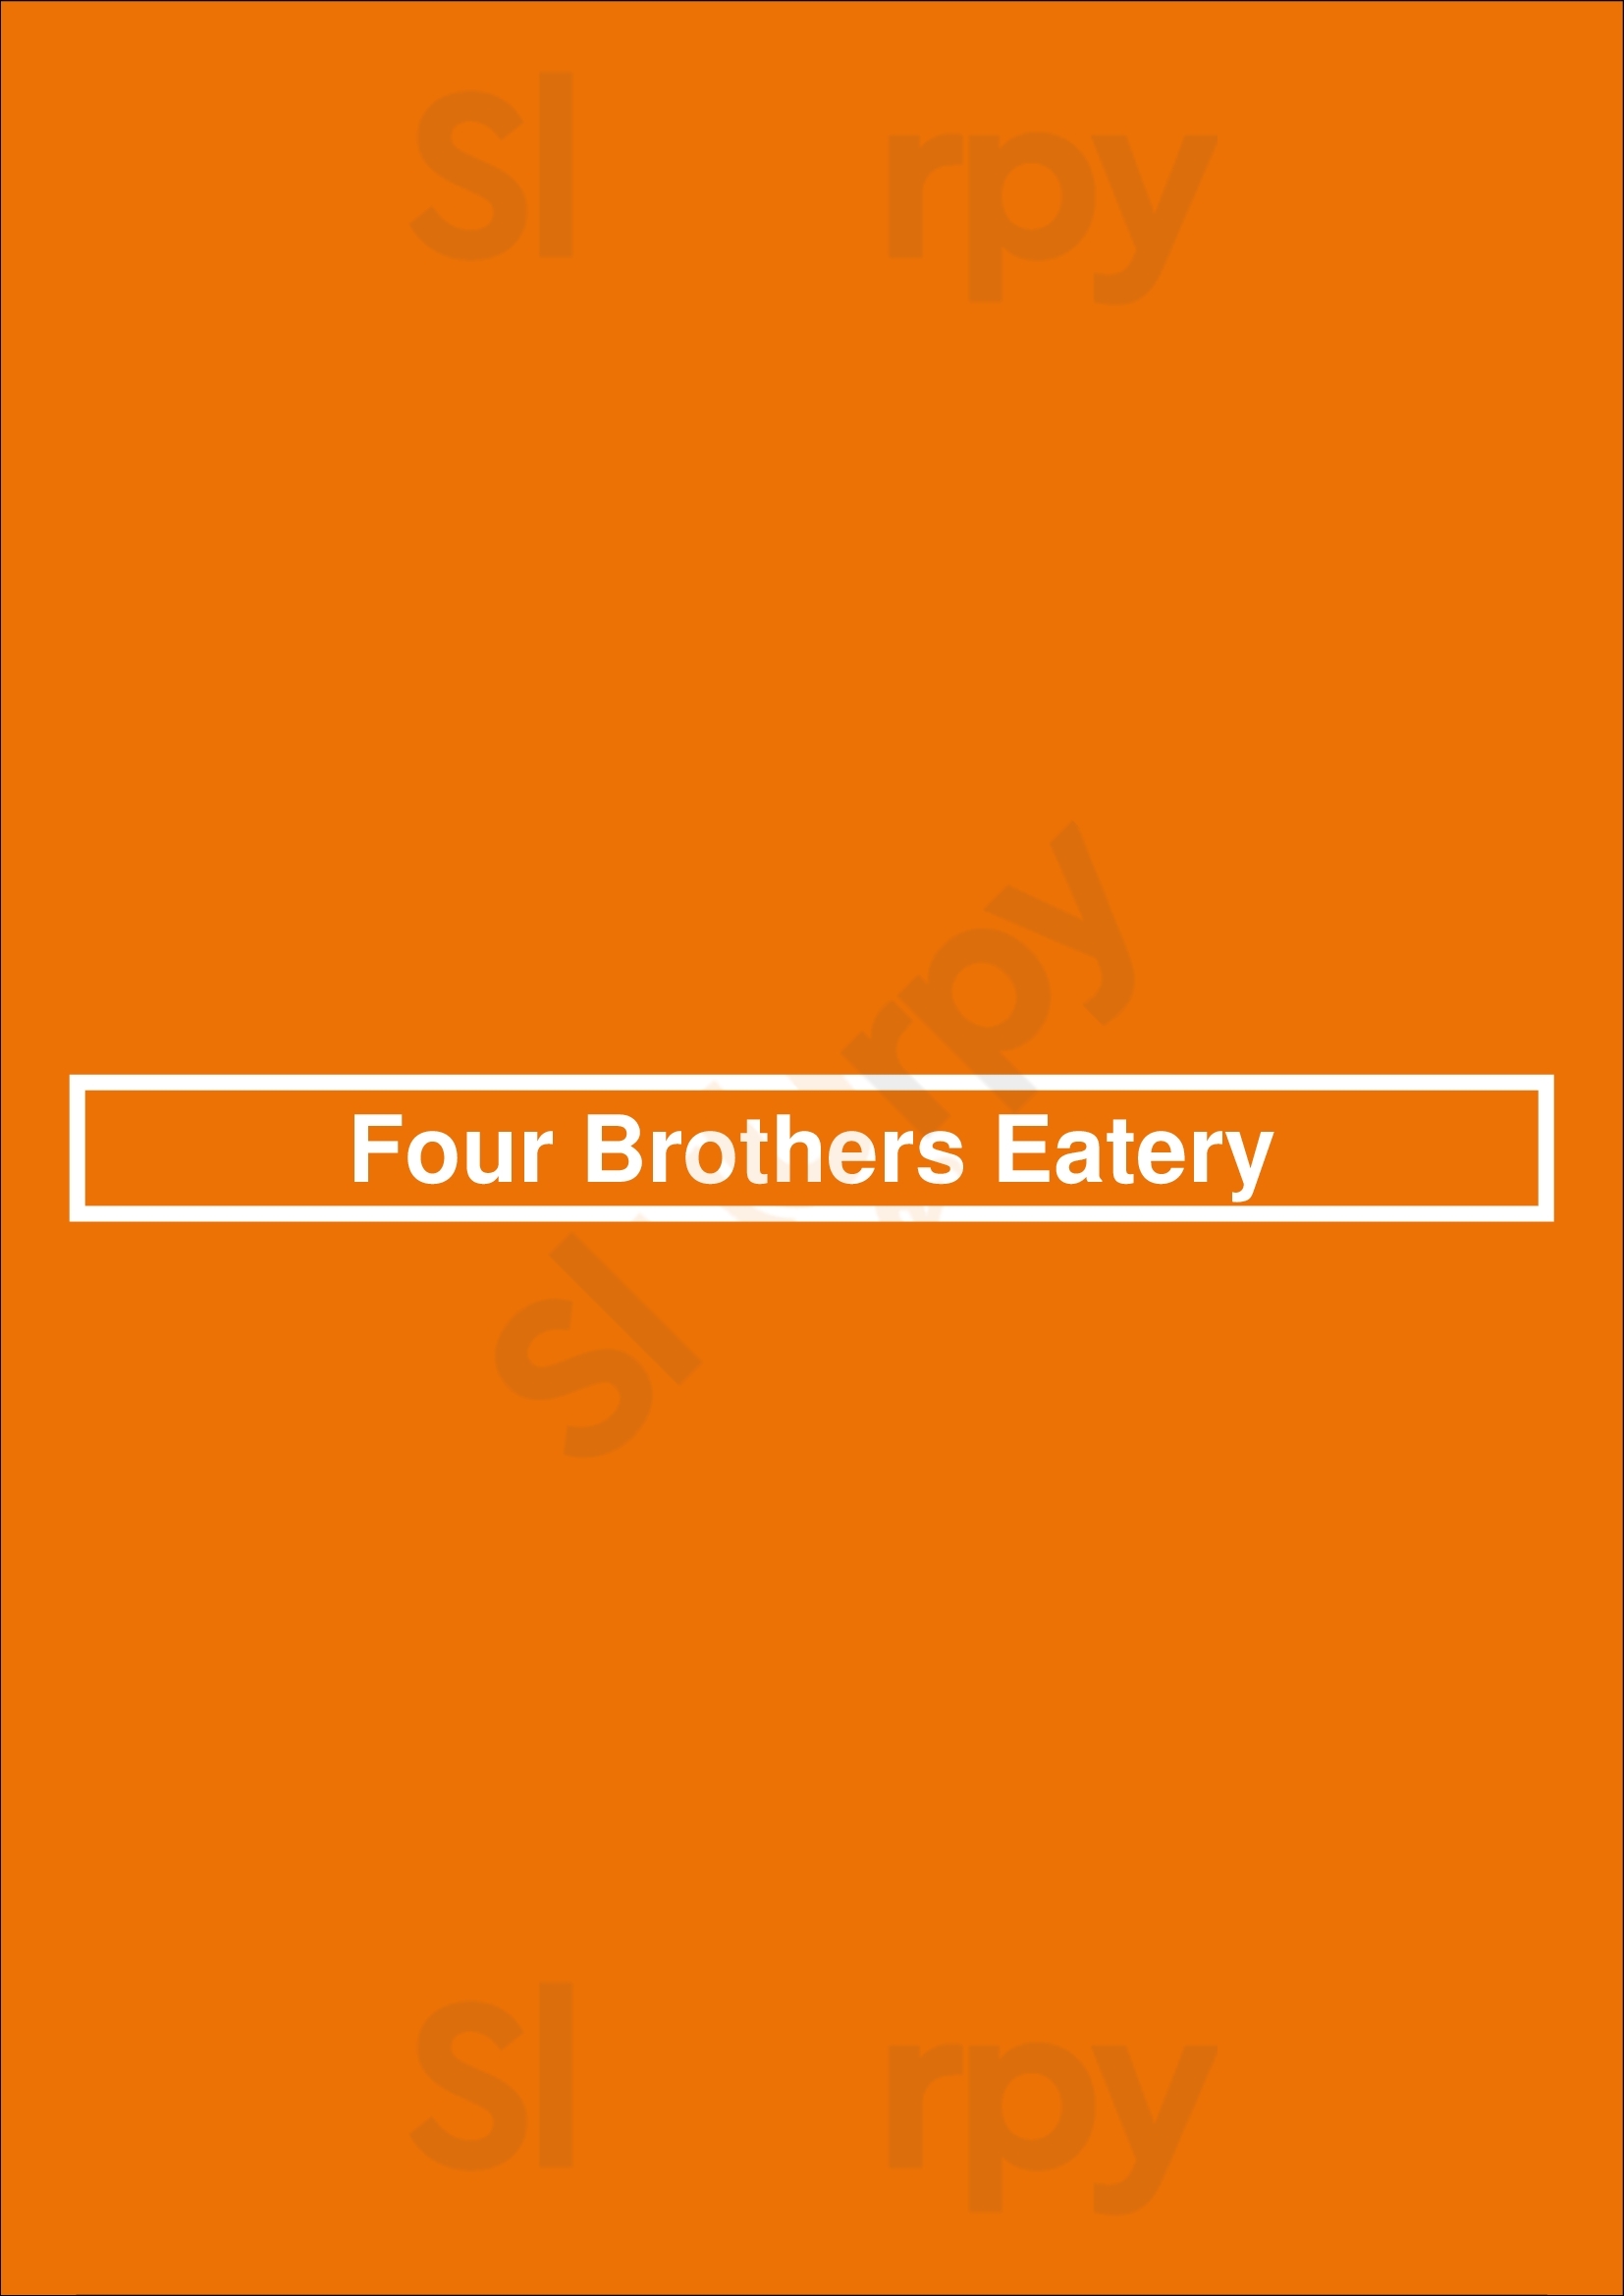 Four Brothers Eatery Tampa Menu - 1